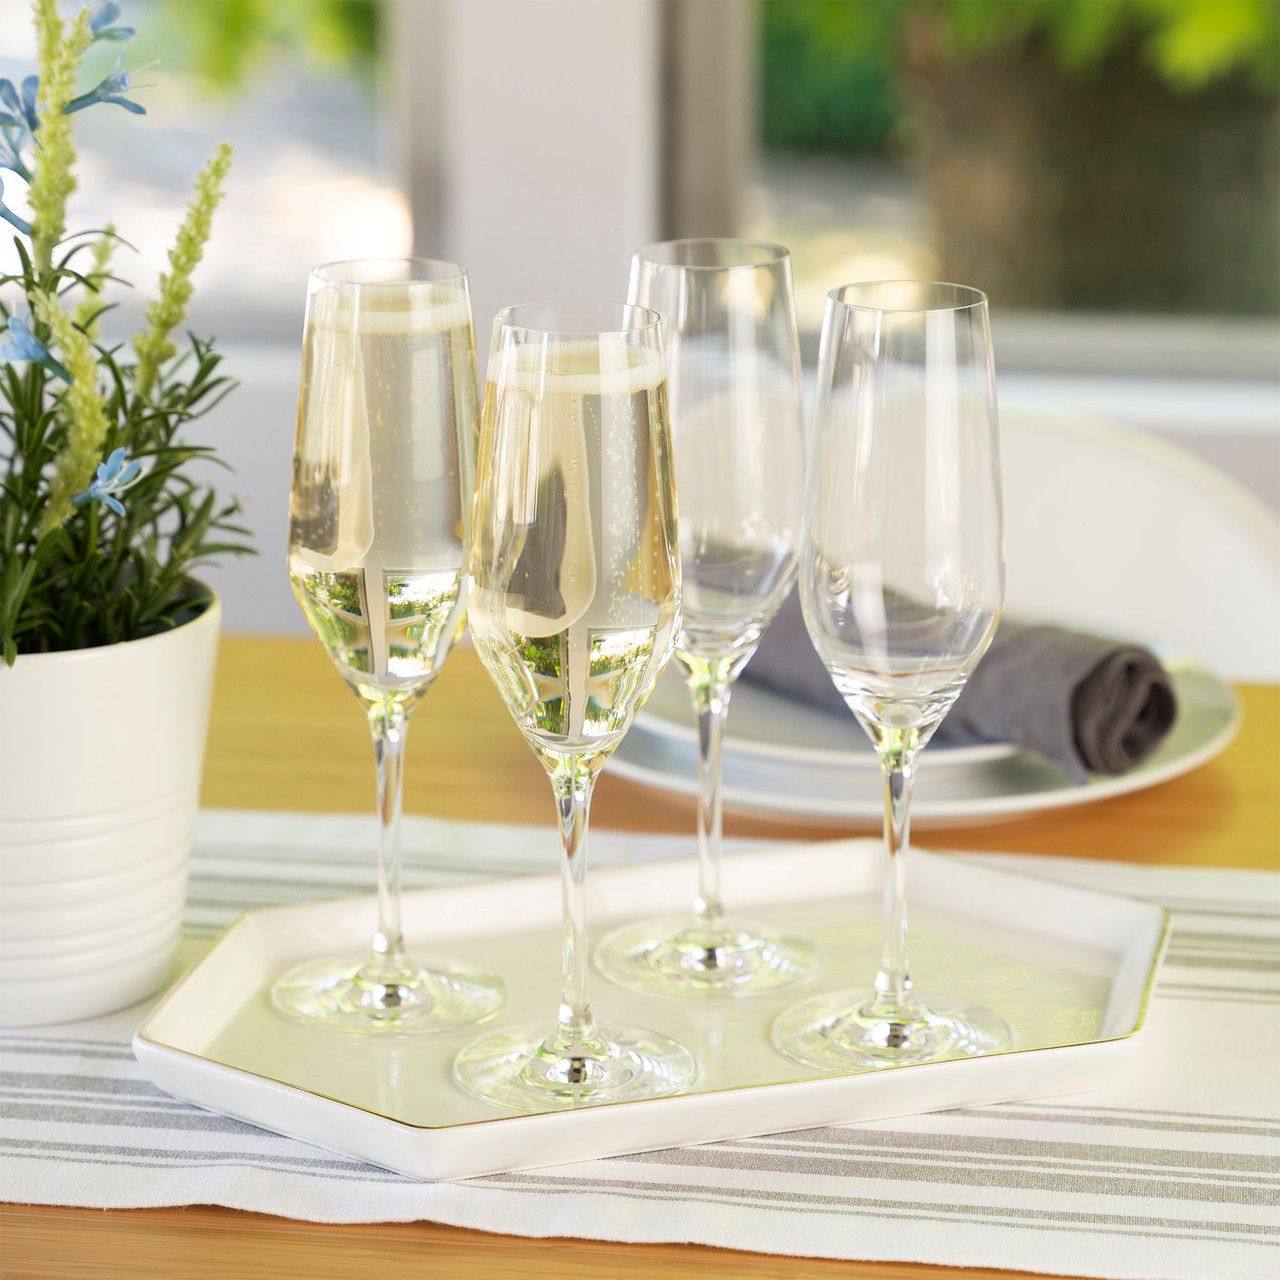 https://cdn11.bigcommerce.com/s-oo0gdojvjo/images/stencil/1280x1280/products/68540/101163/spiegelau-style-8-5-oz-champagne-flutes-set-of-4-2__28719.1683795489.jpg?c=2&imbypass=on